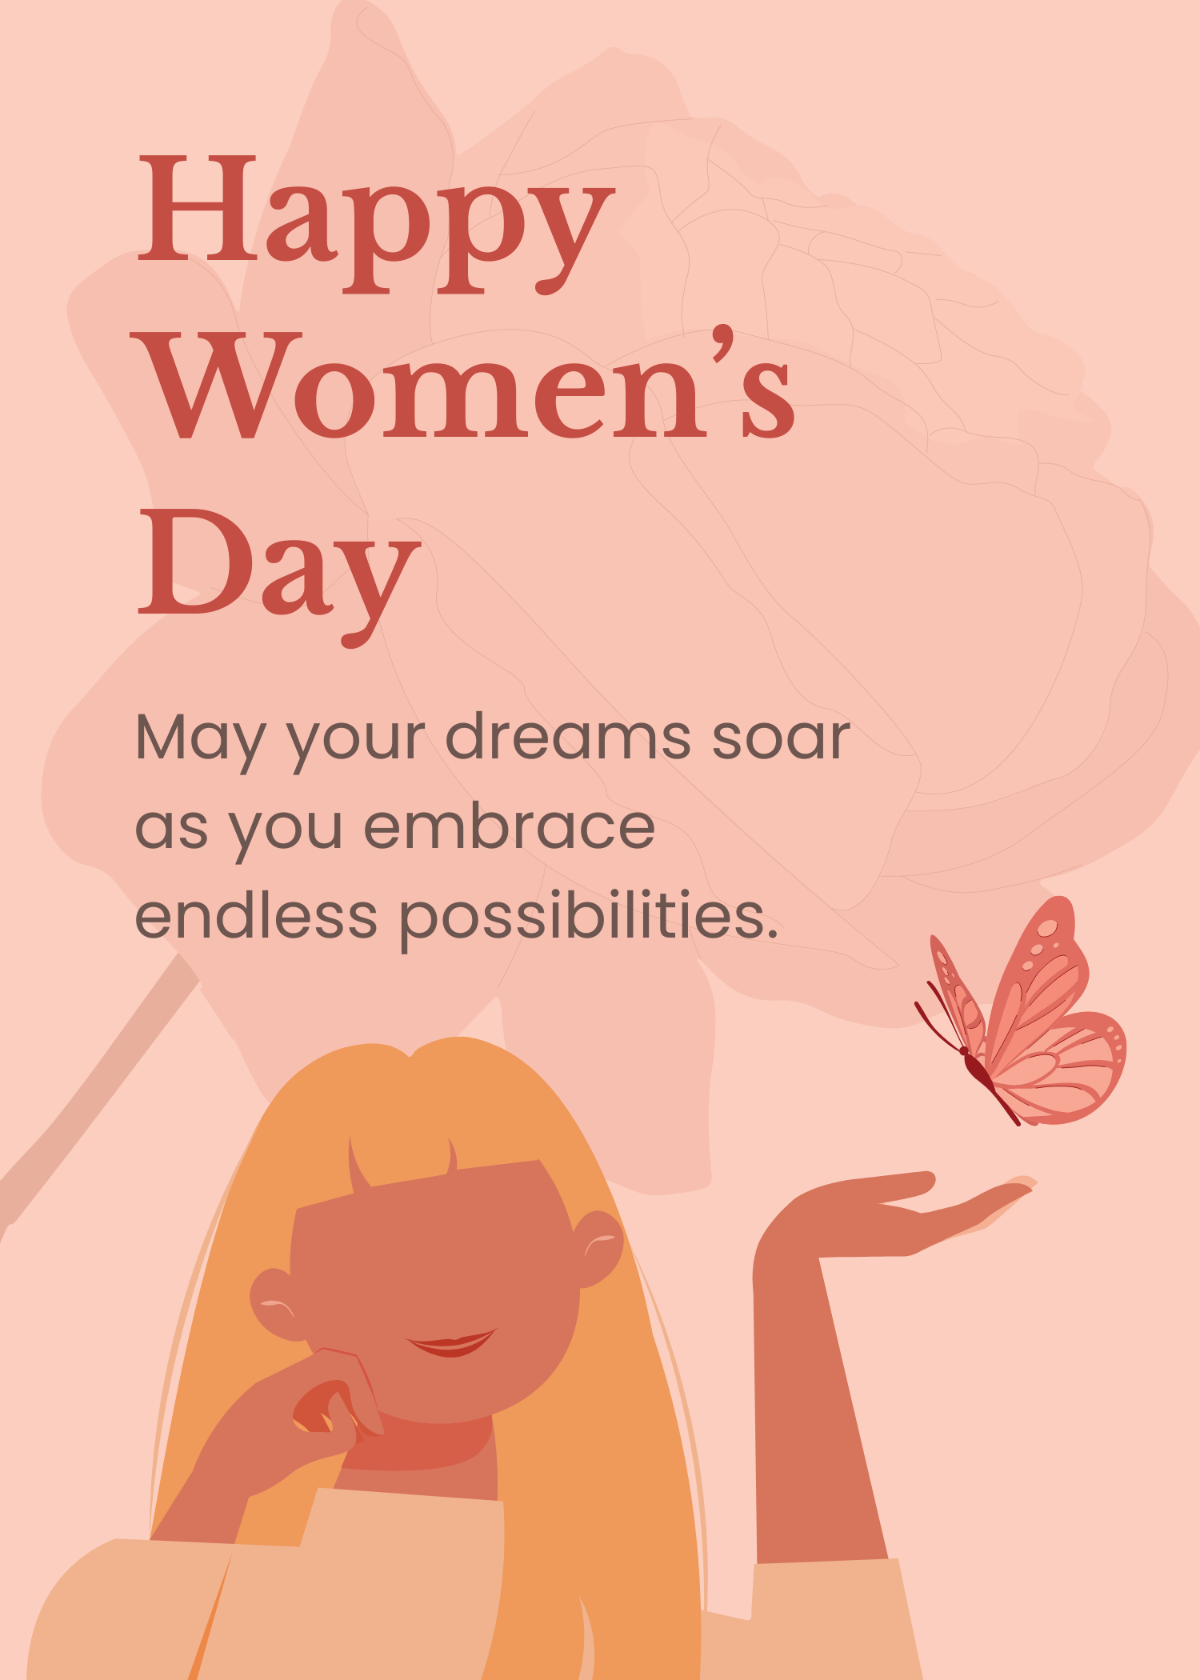 Happy Women's Day Wishes Template